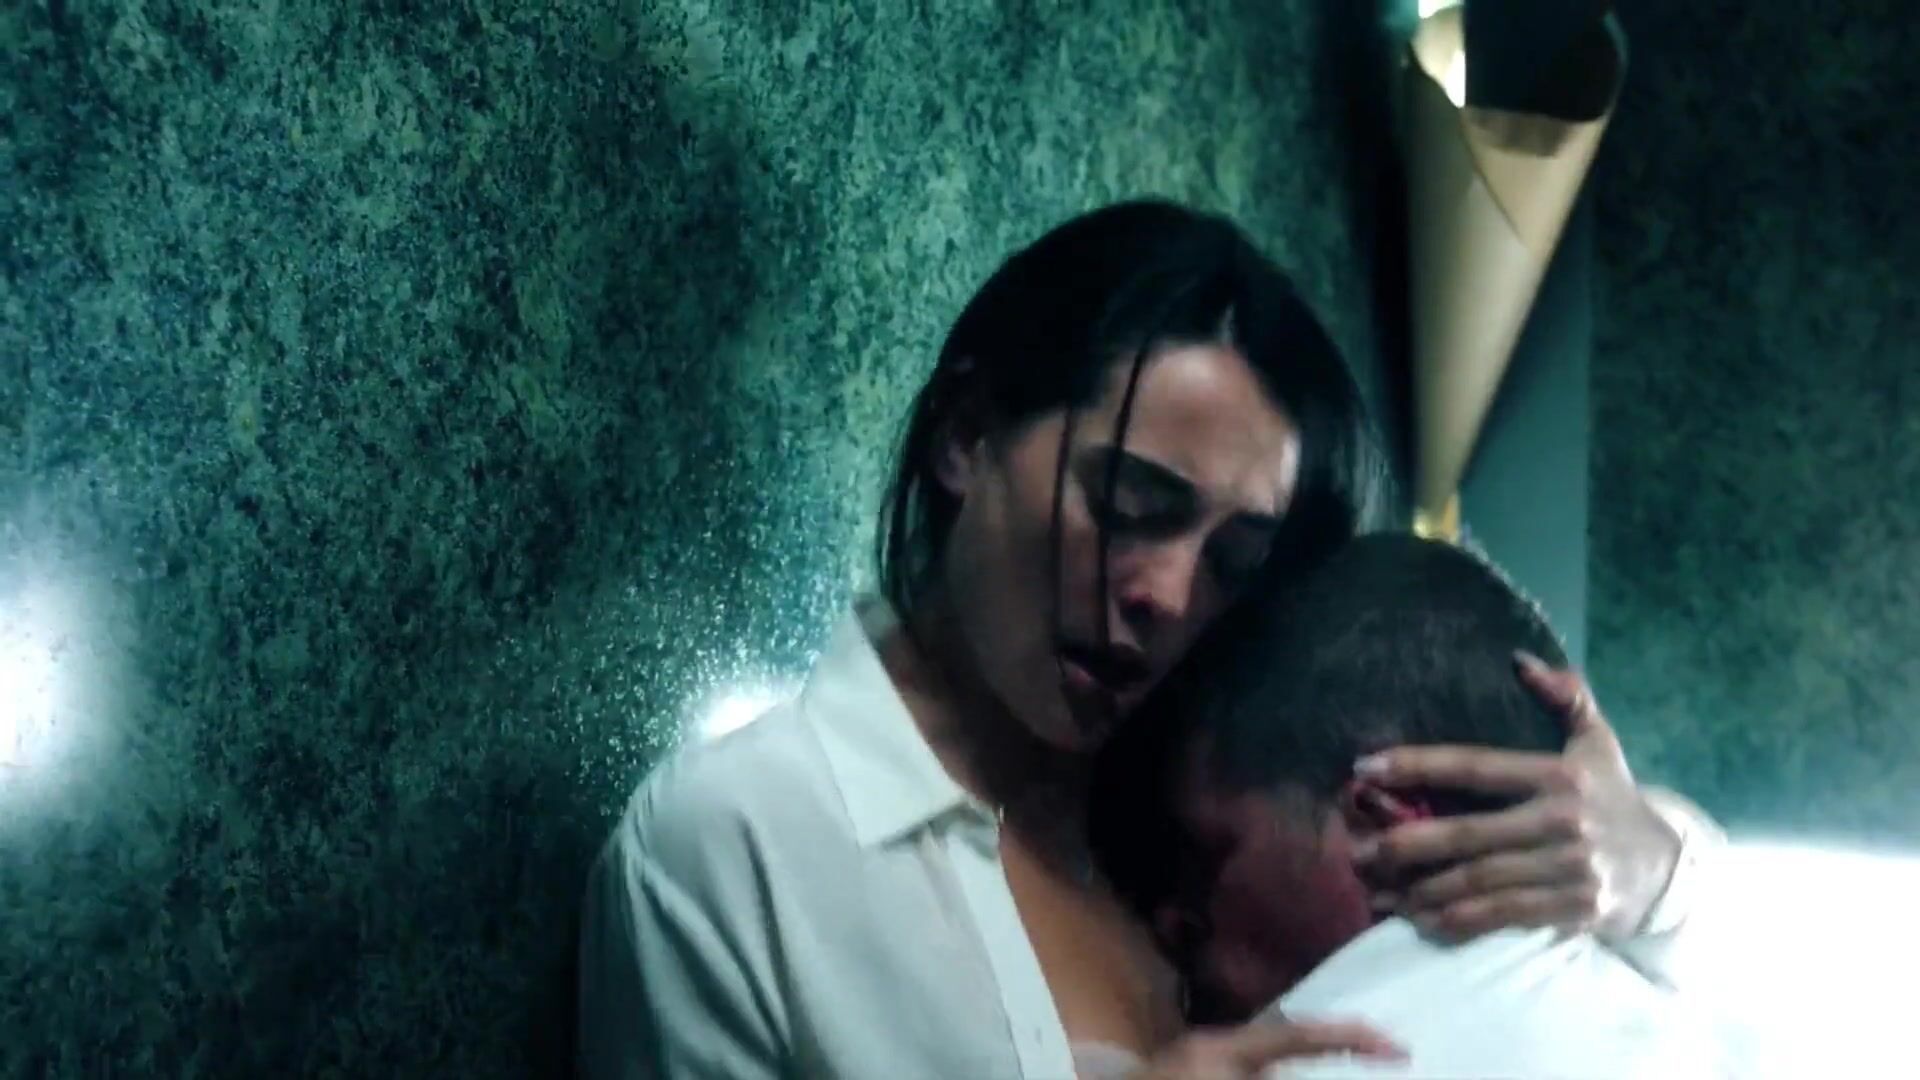 Asslick Man entices Natalie Martinez and finally hooks up with her in elevator in Into the Dark WatchersWeb - 1